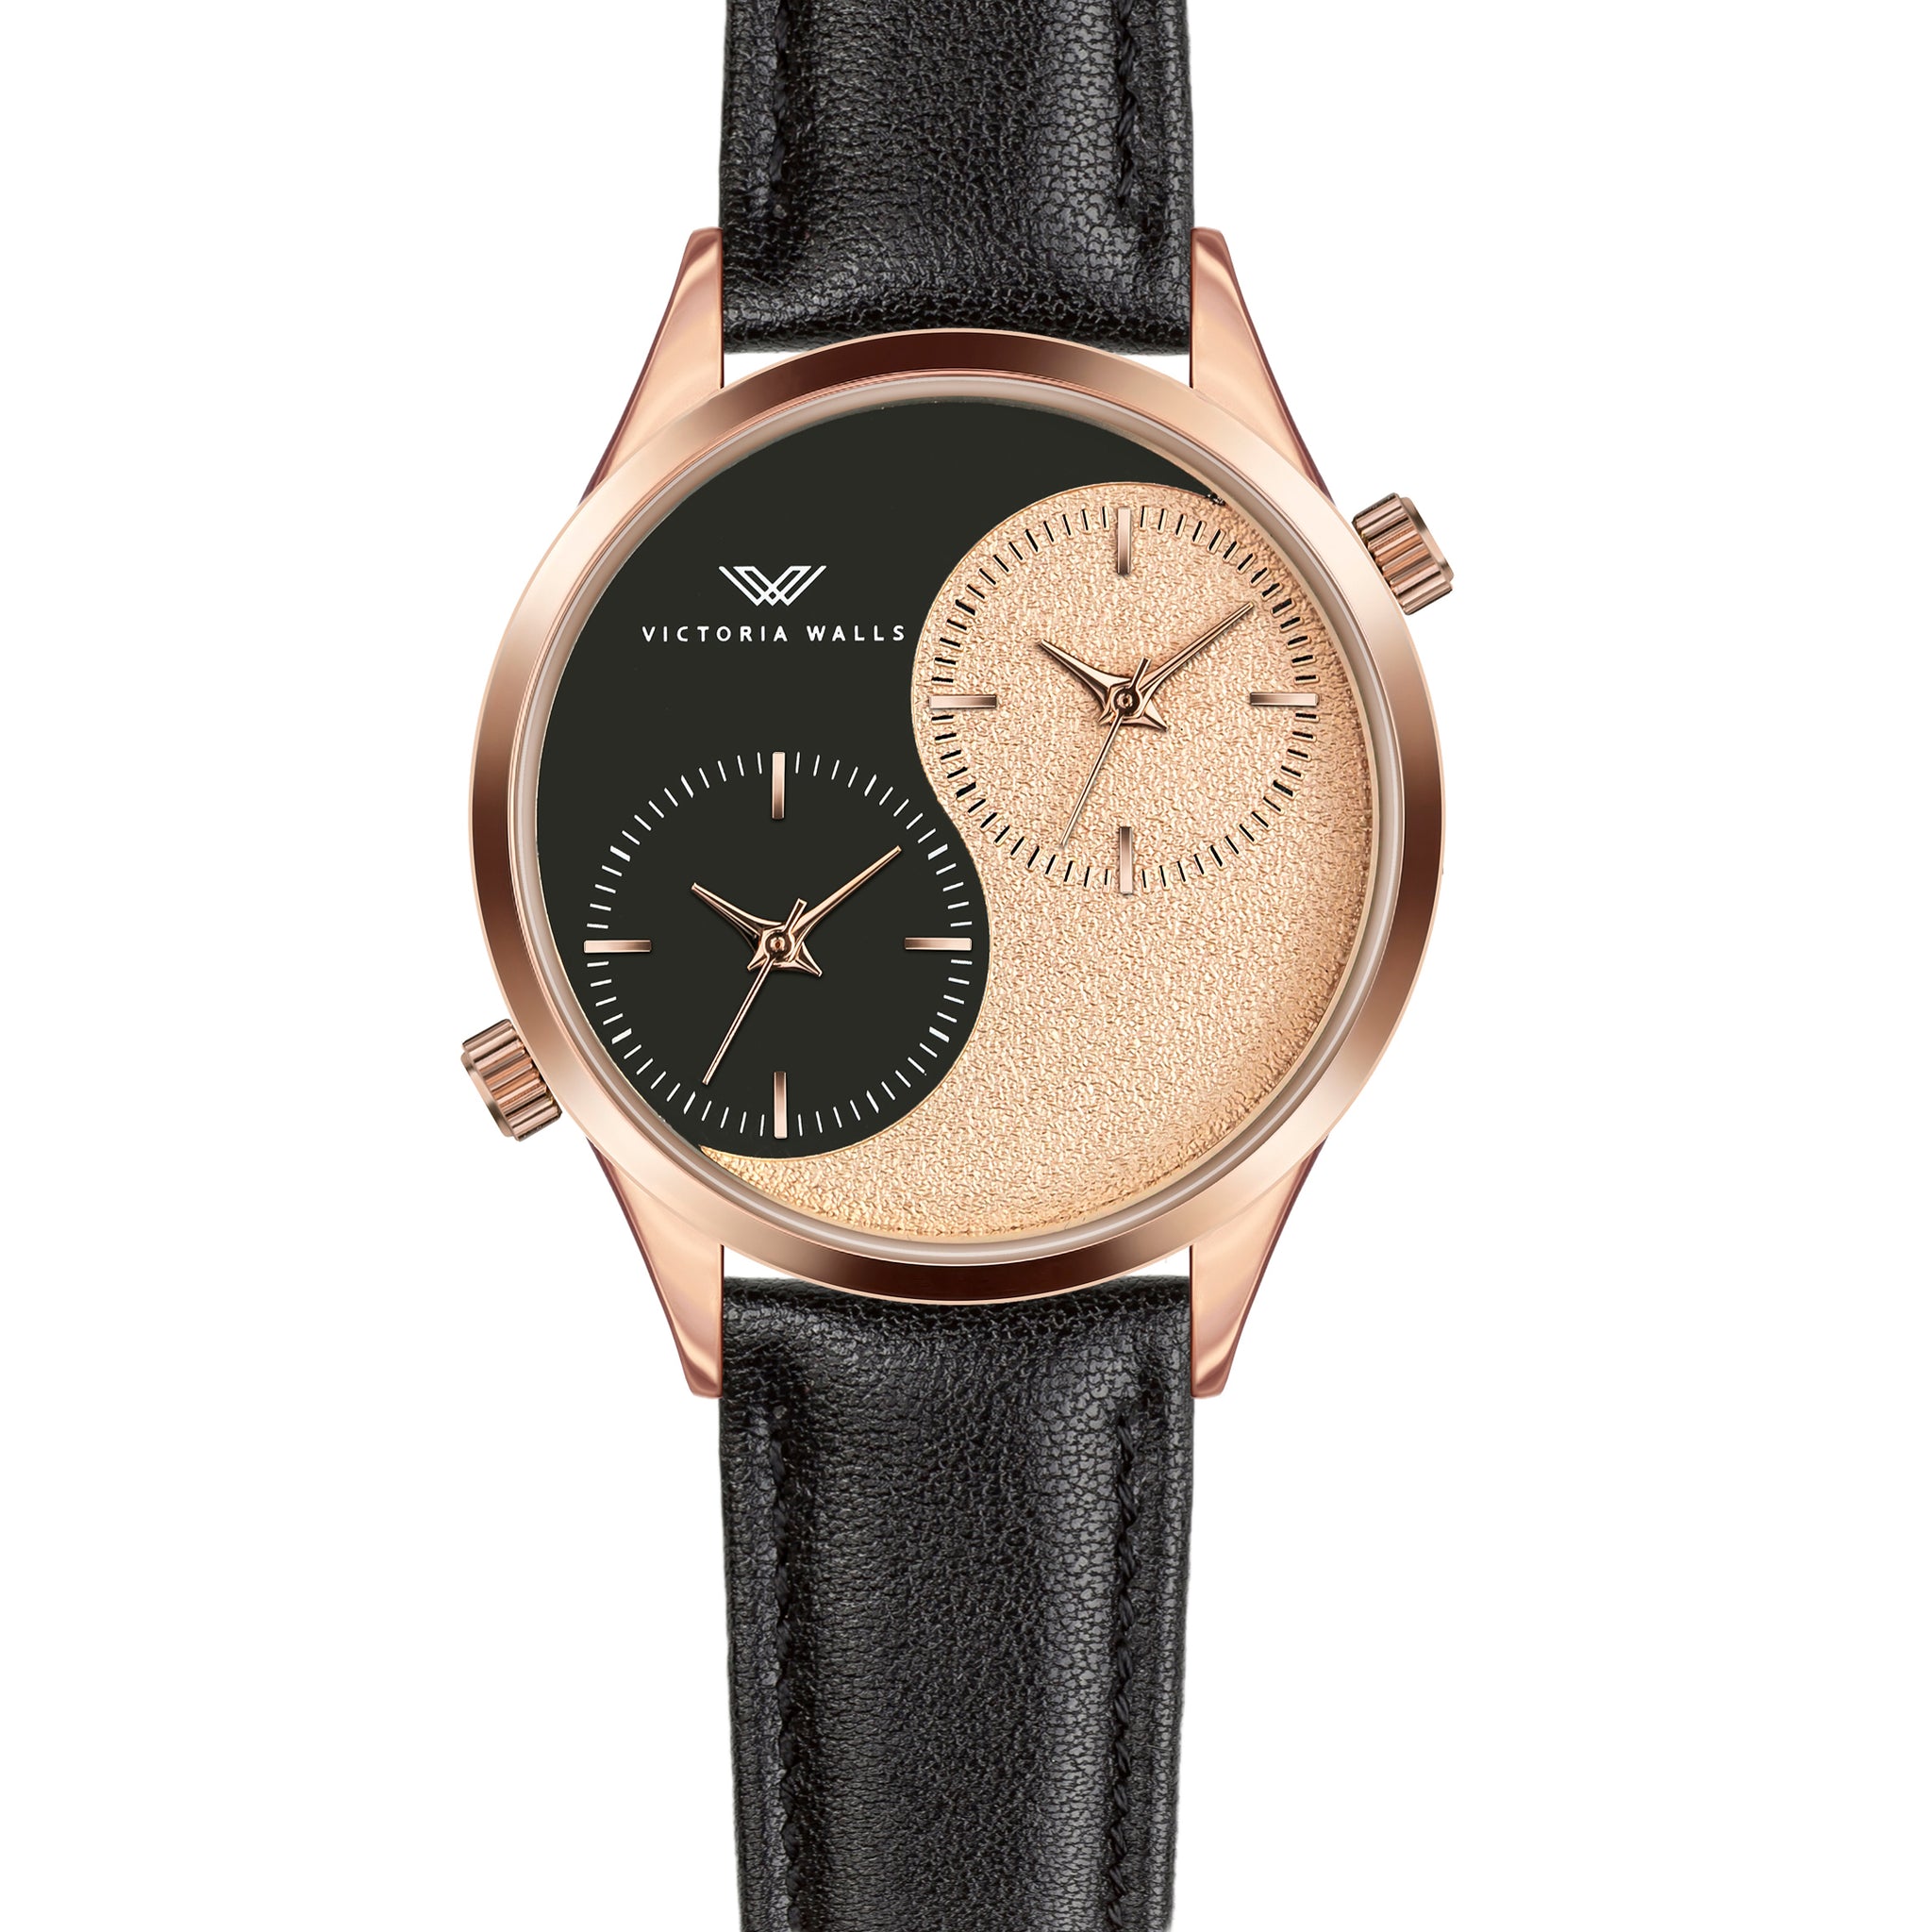 Mazikeen Black Leather Watch